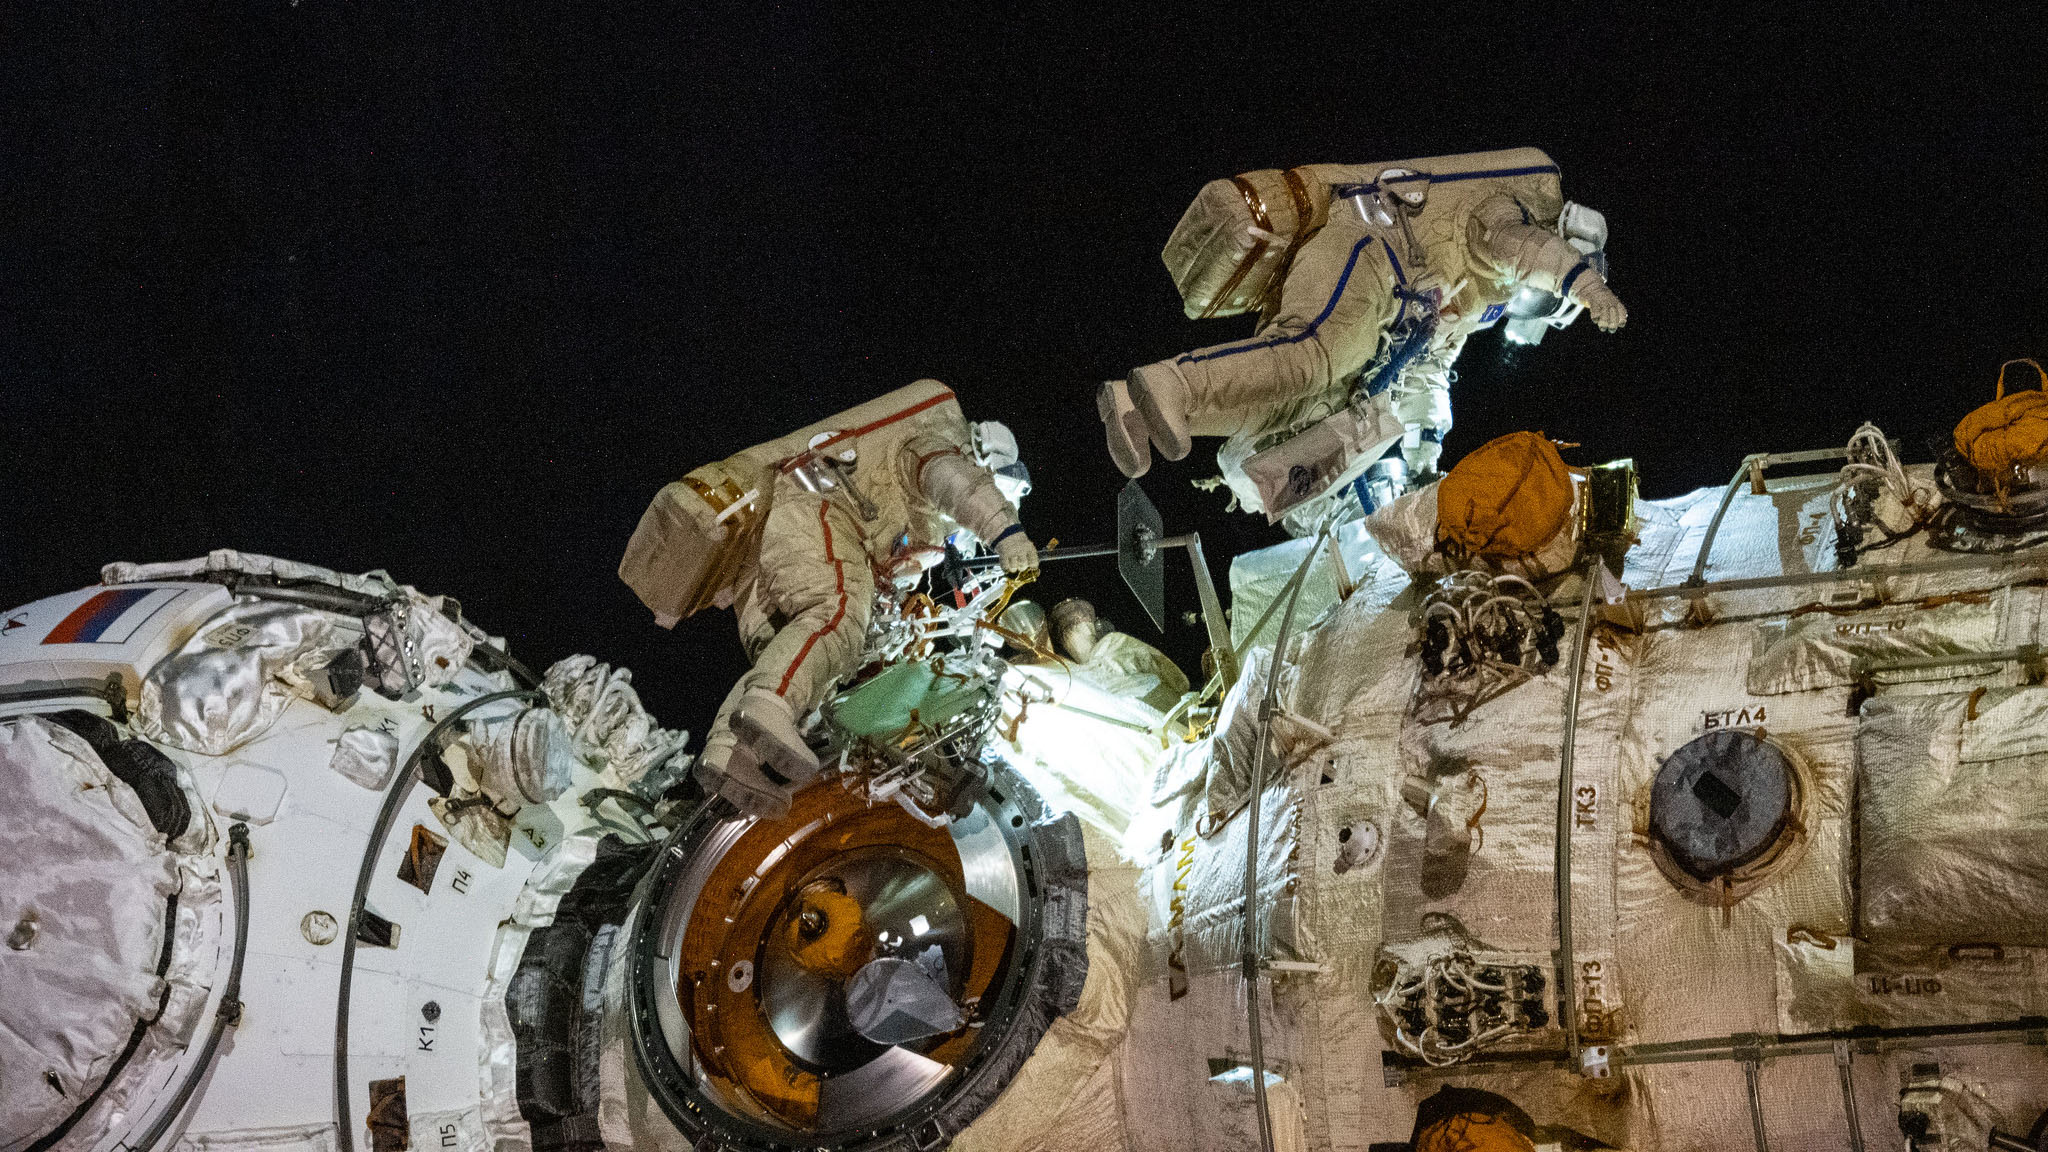  Watch 2 Russian cosmonauts spacewalk outside the International Space Station today 